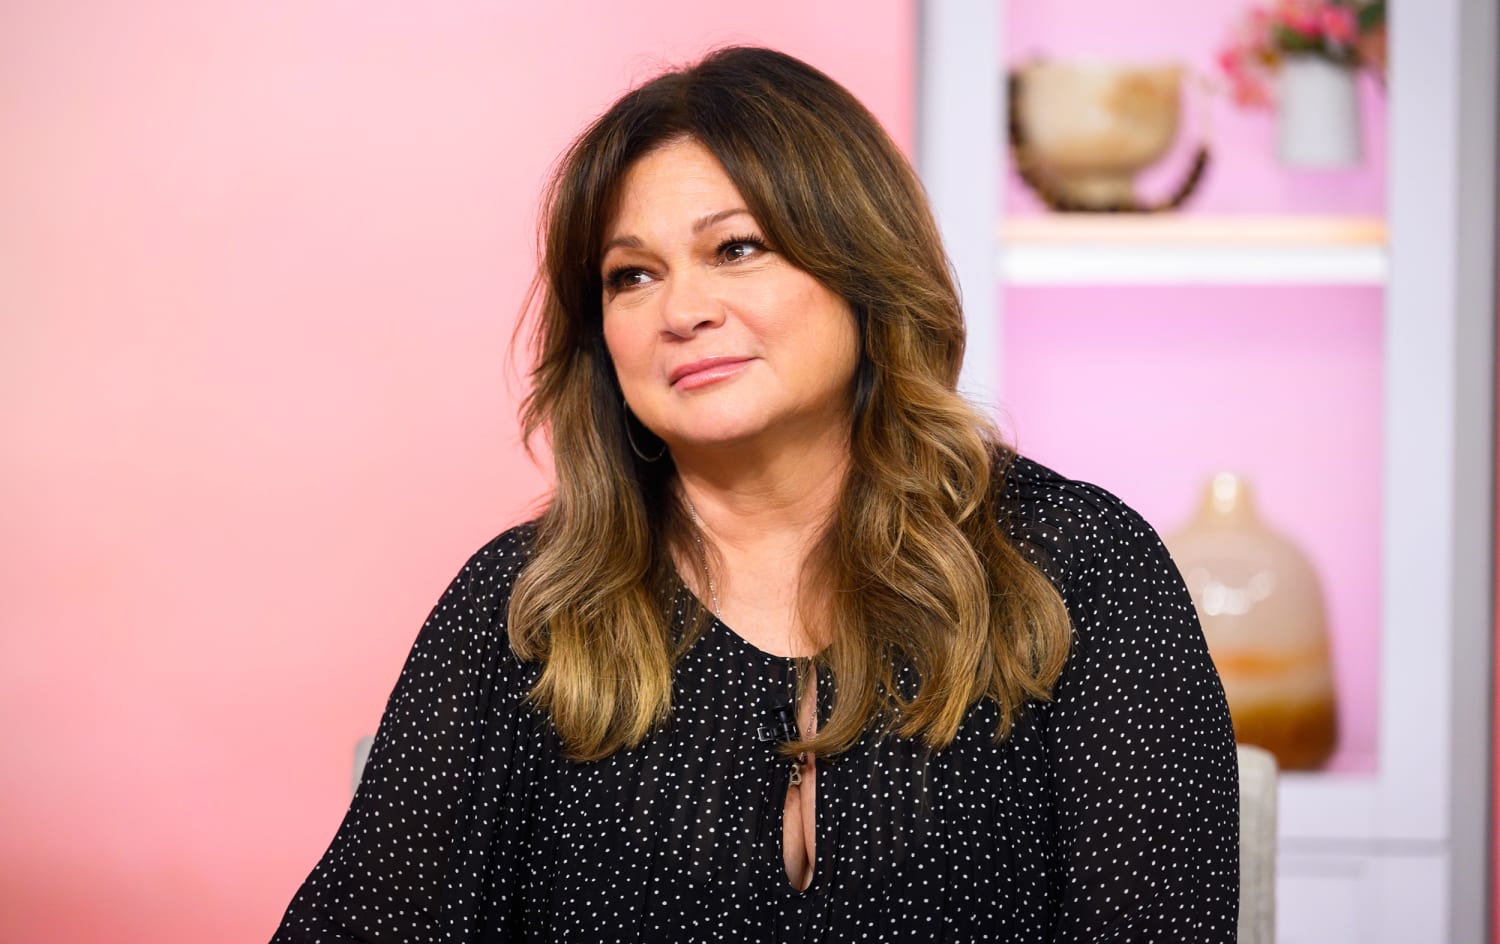 Valerie Bertinelli says she's 'speechless' after receiving Emmy noms for cancelled Food Network show